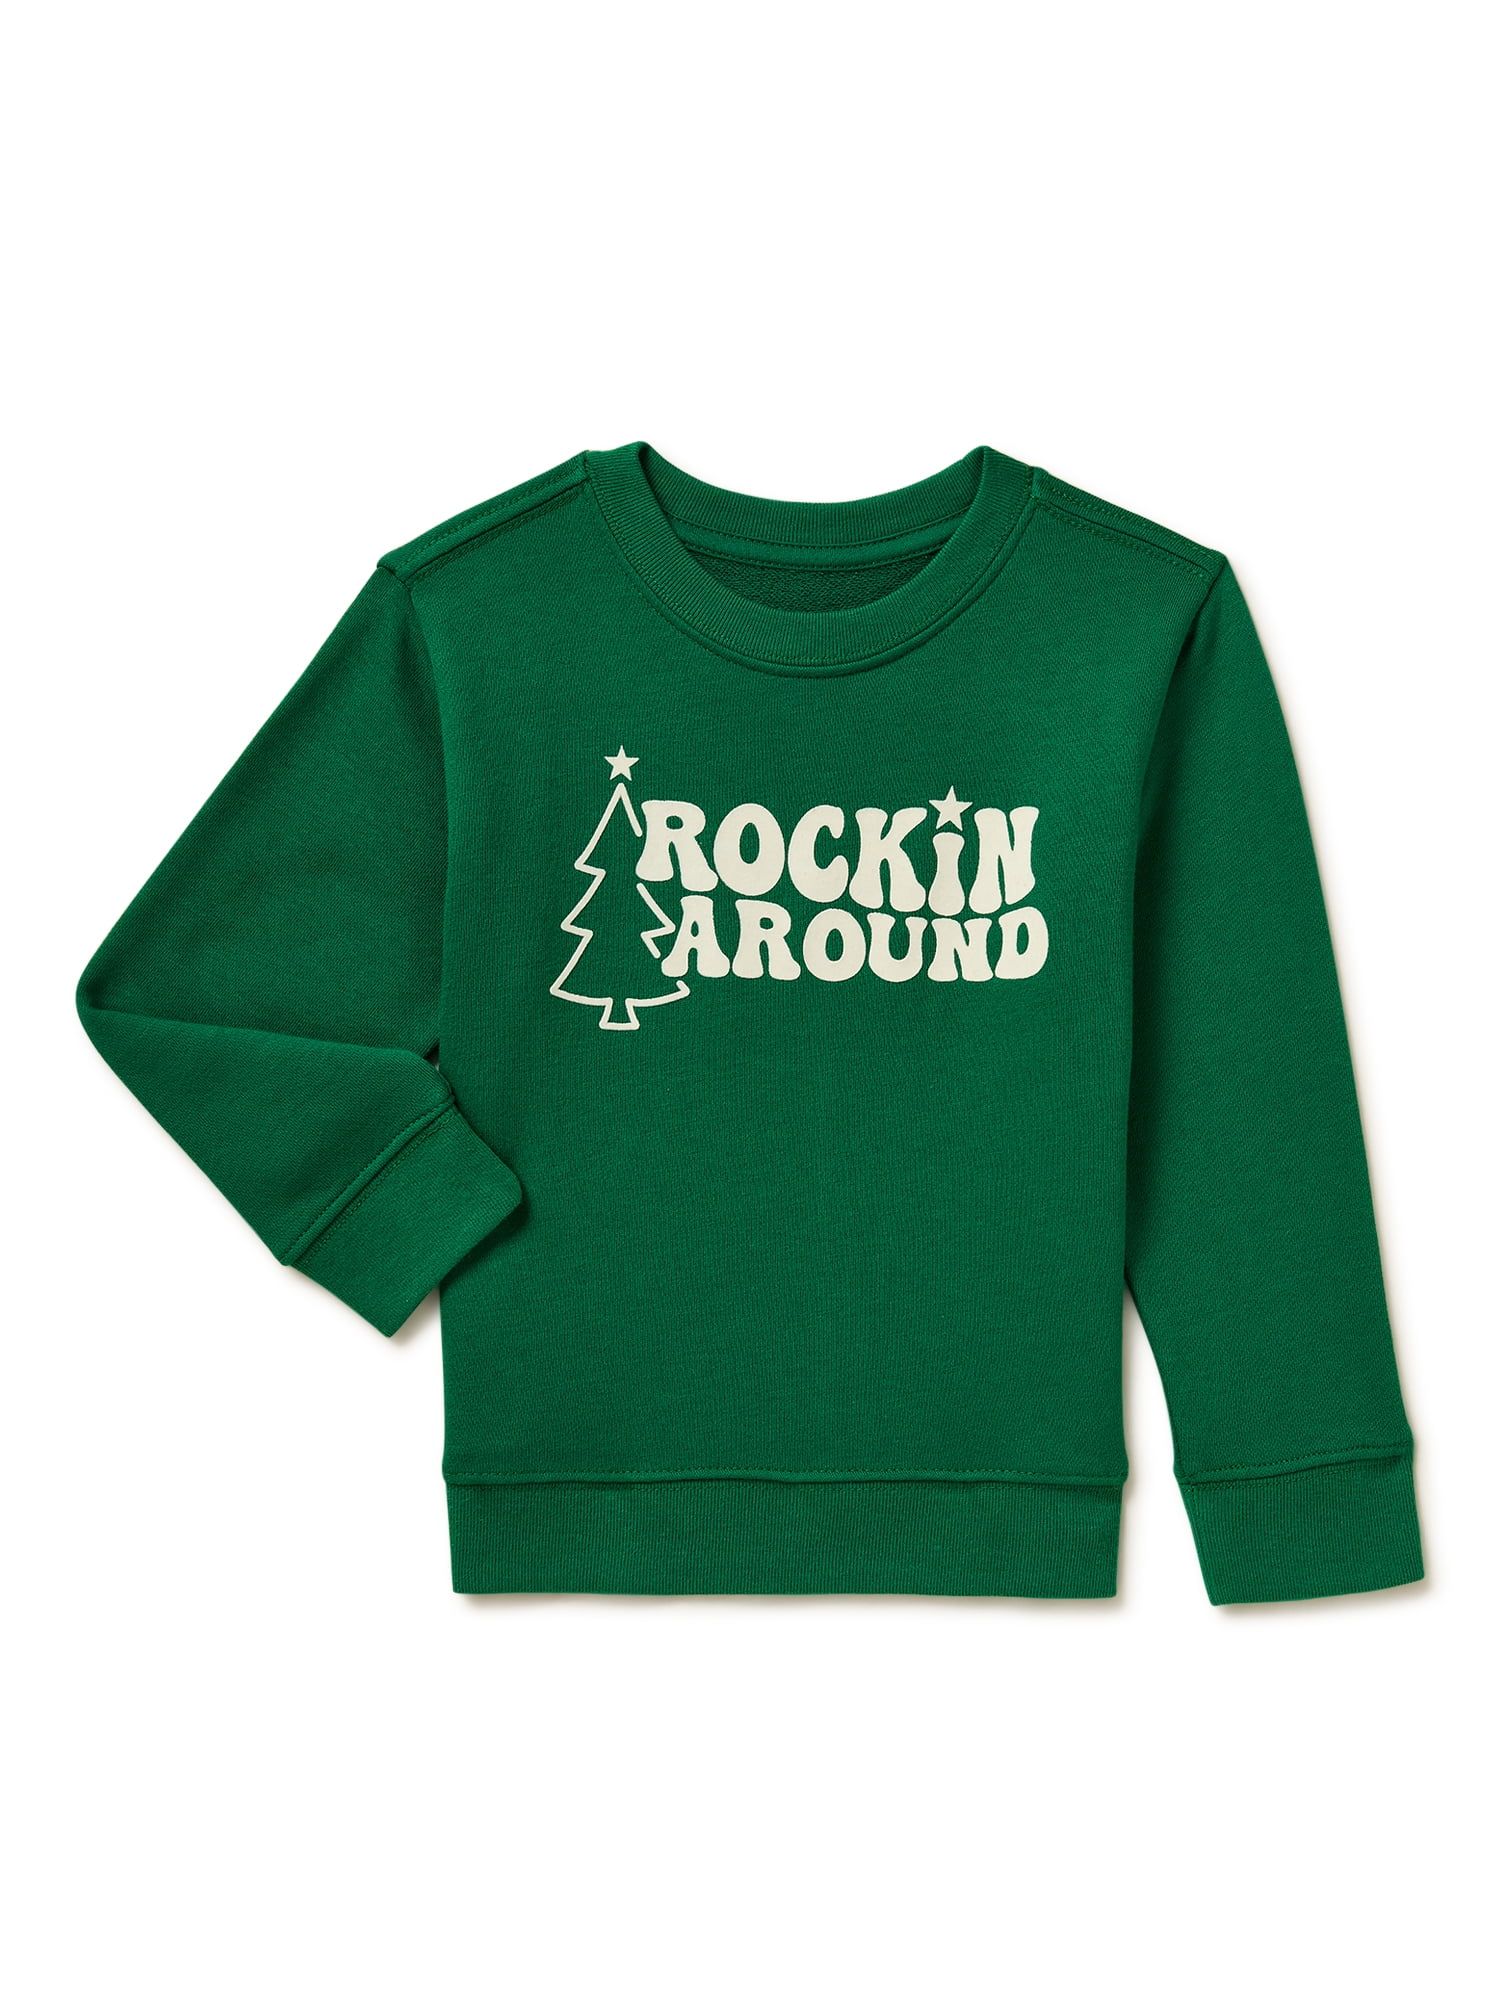 Holiday Time Baby and Toddler Boys Graphic Print Christmas Sweatshirt, Sizes 12 Months-5T - Walma... | Walmart (US)